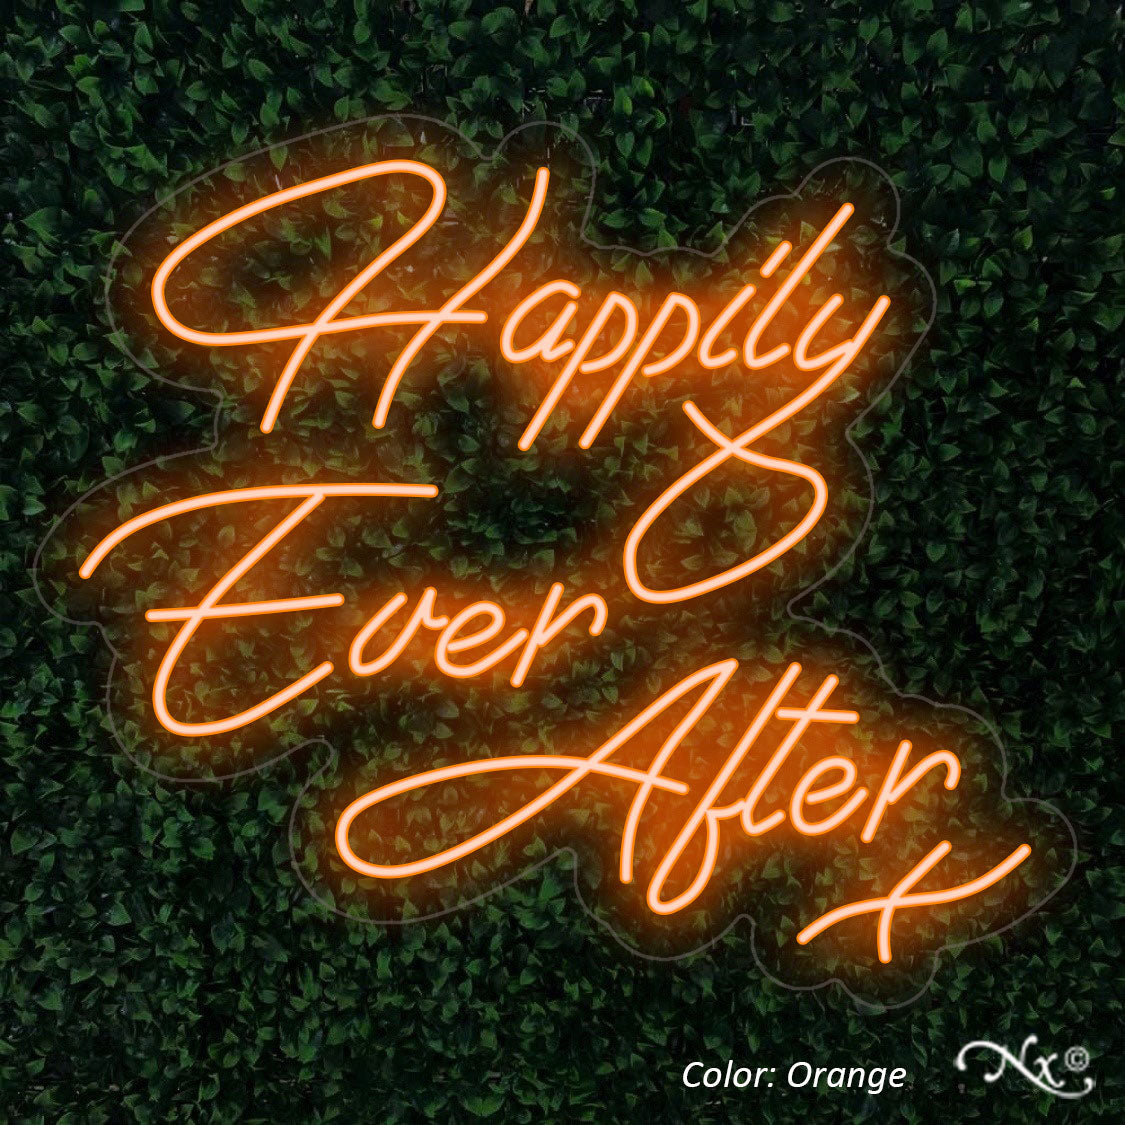 Happily Ever After Neon Sign color orange